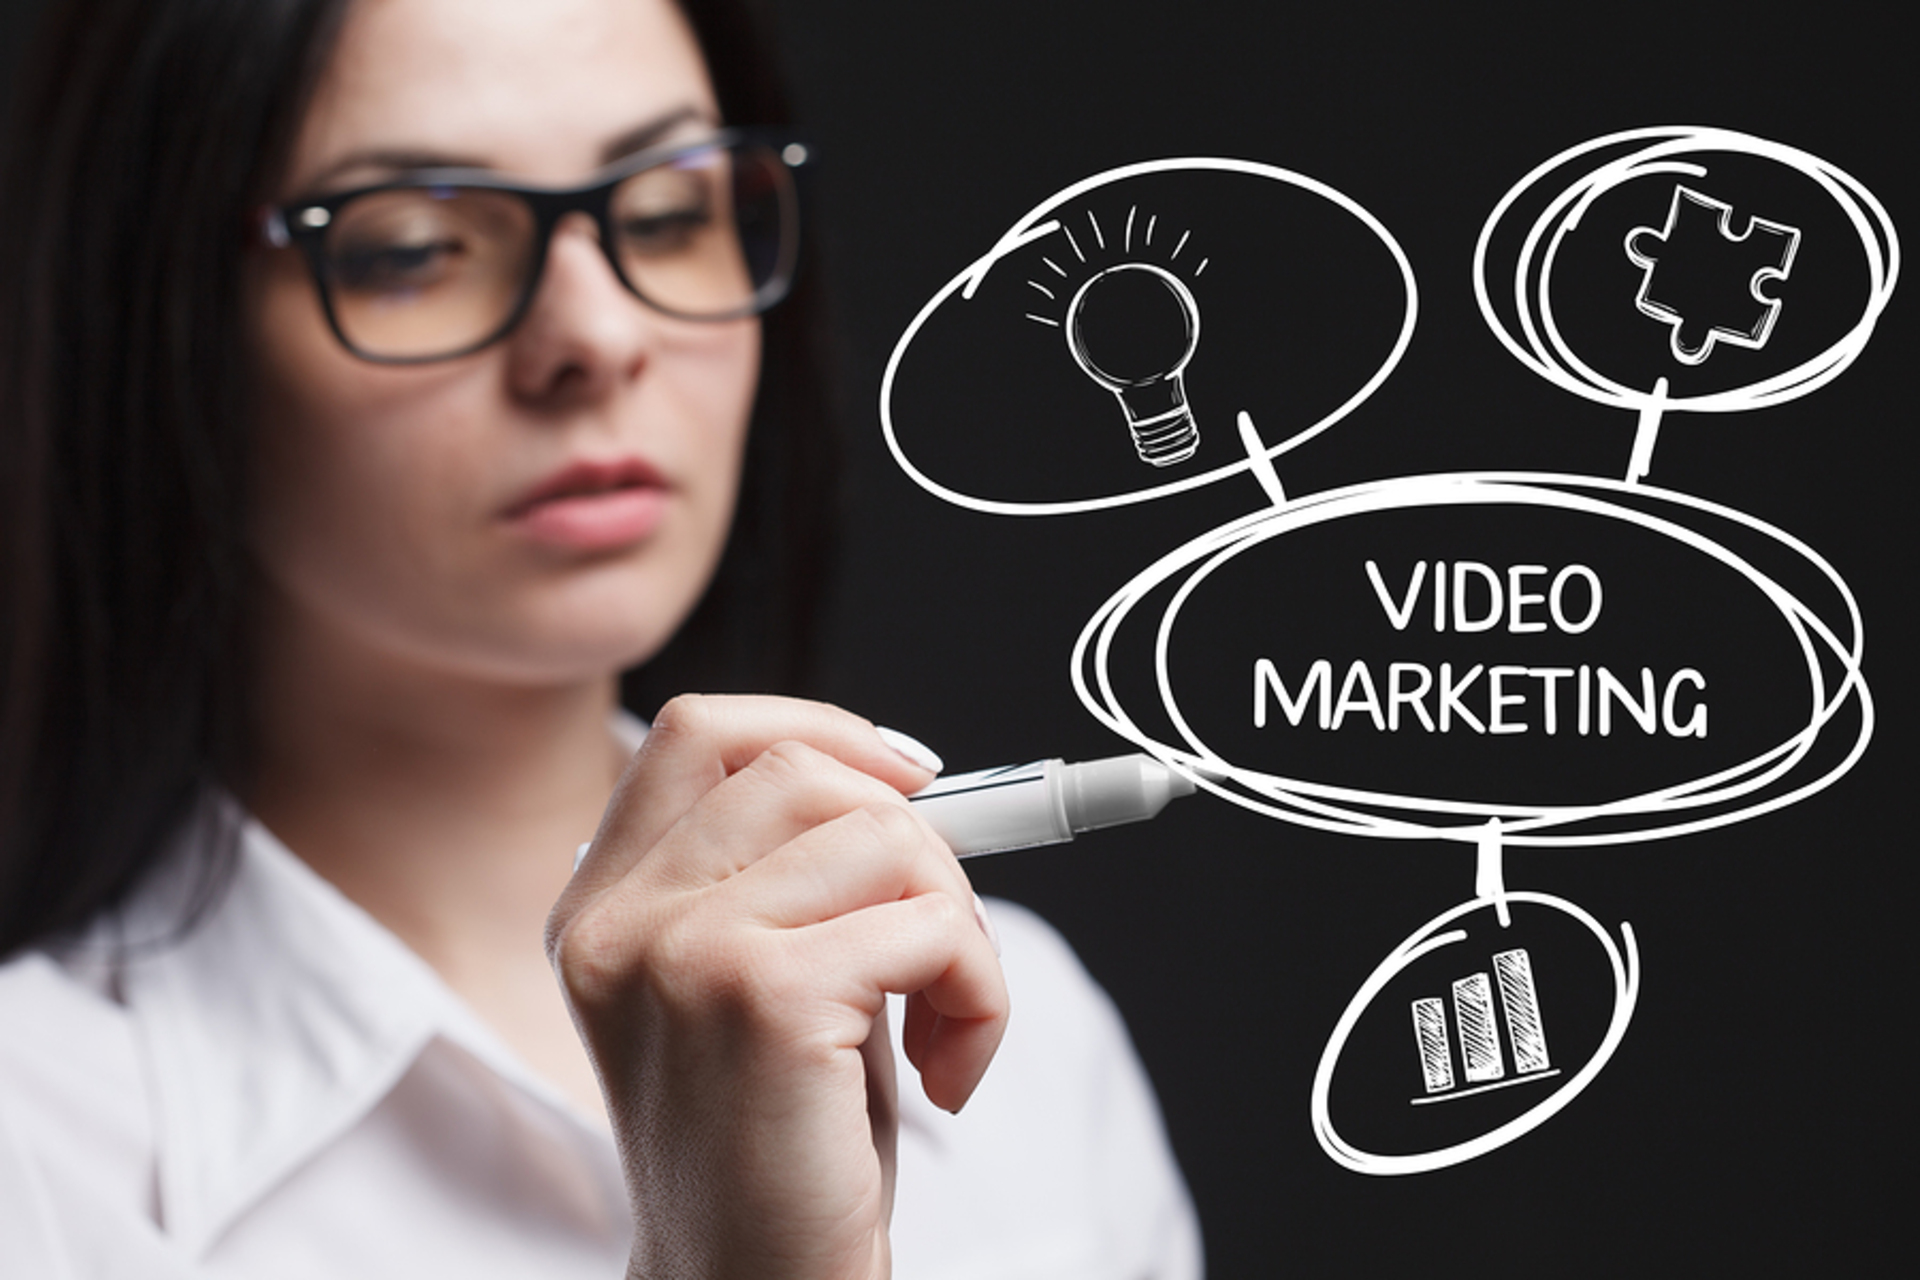 Video marketers